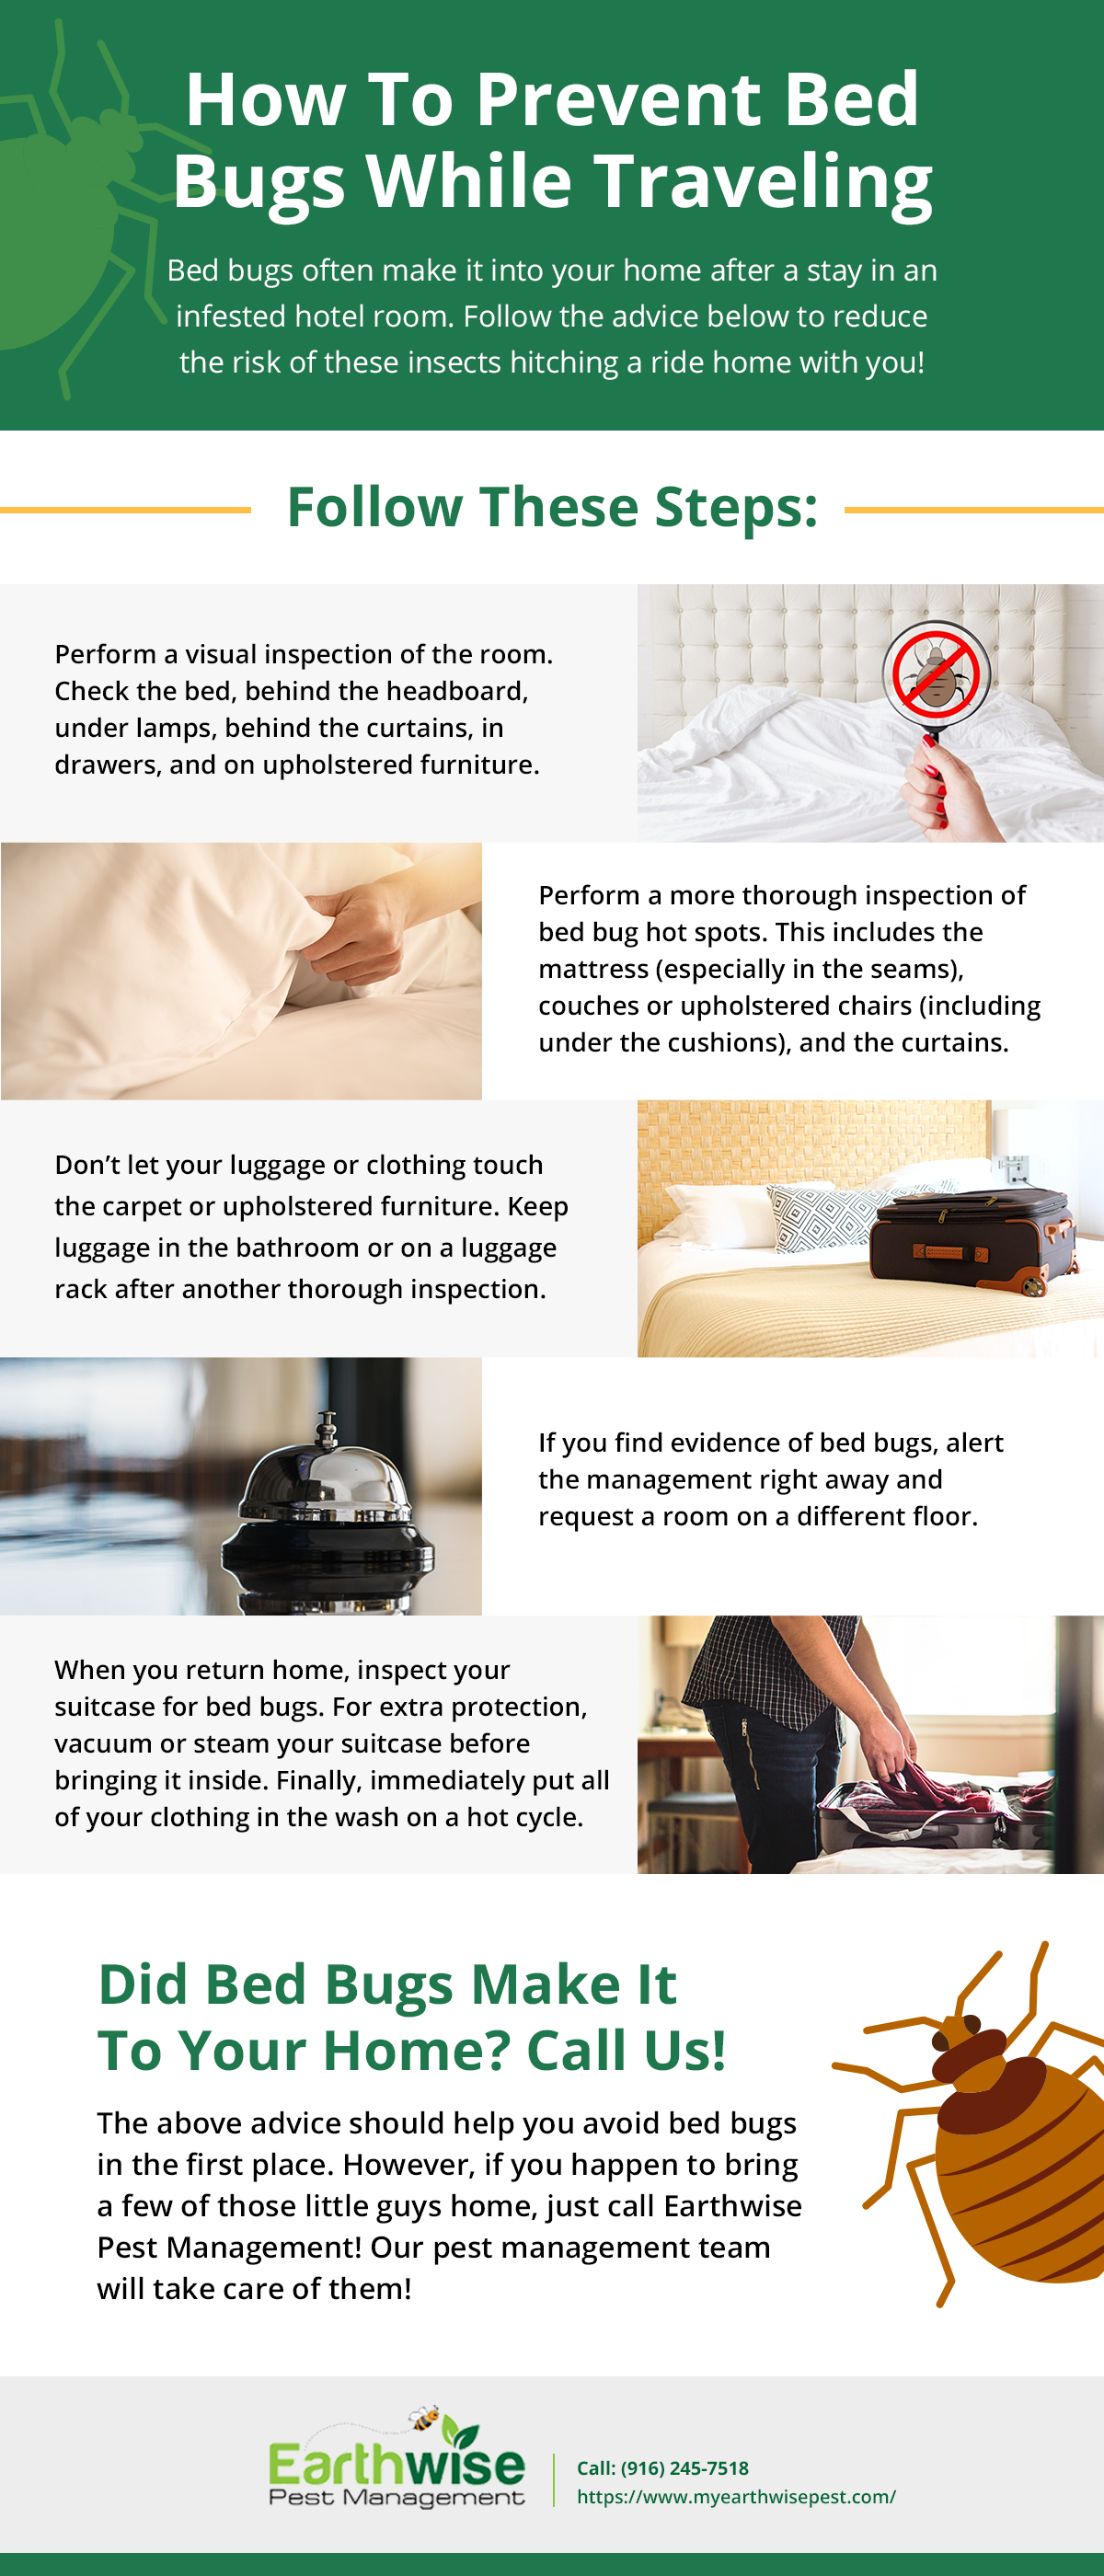 How To Prevent Bed Bugs While Traveling